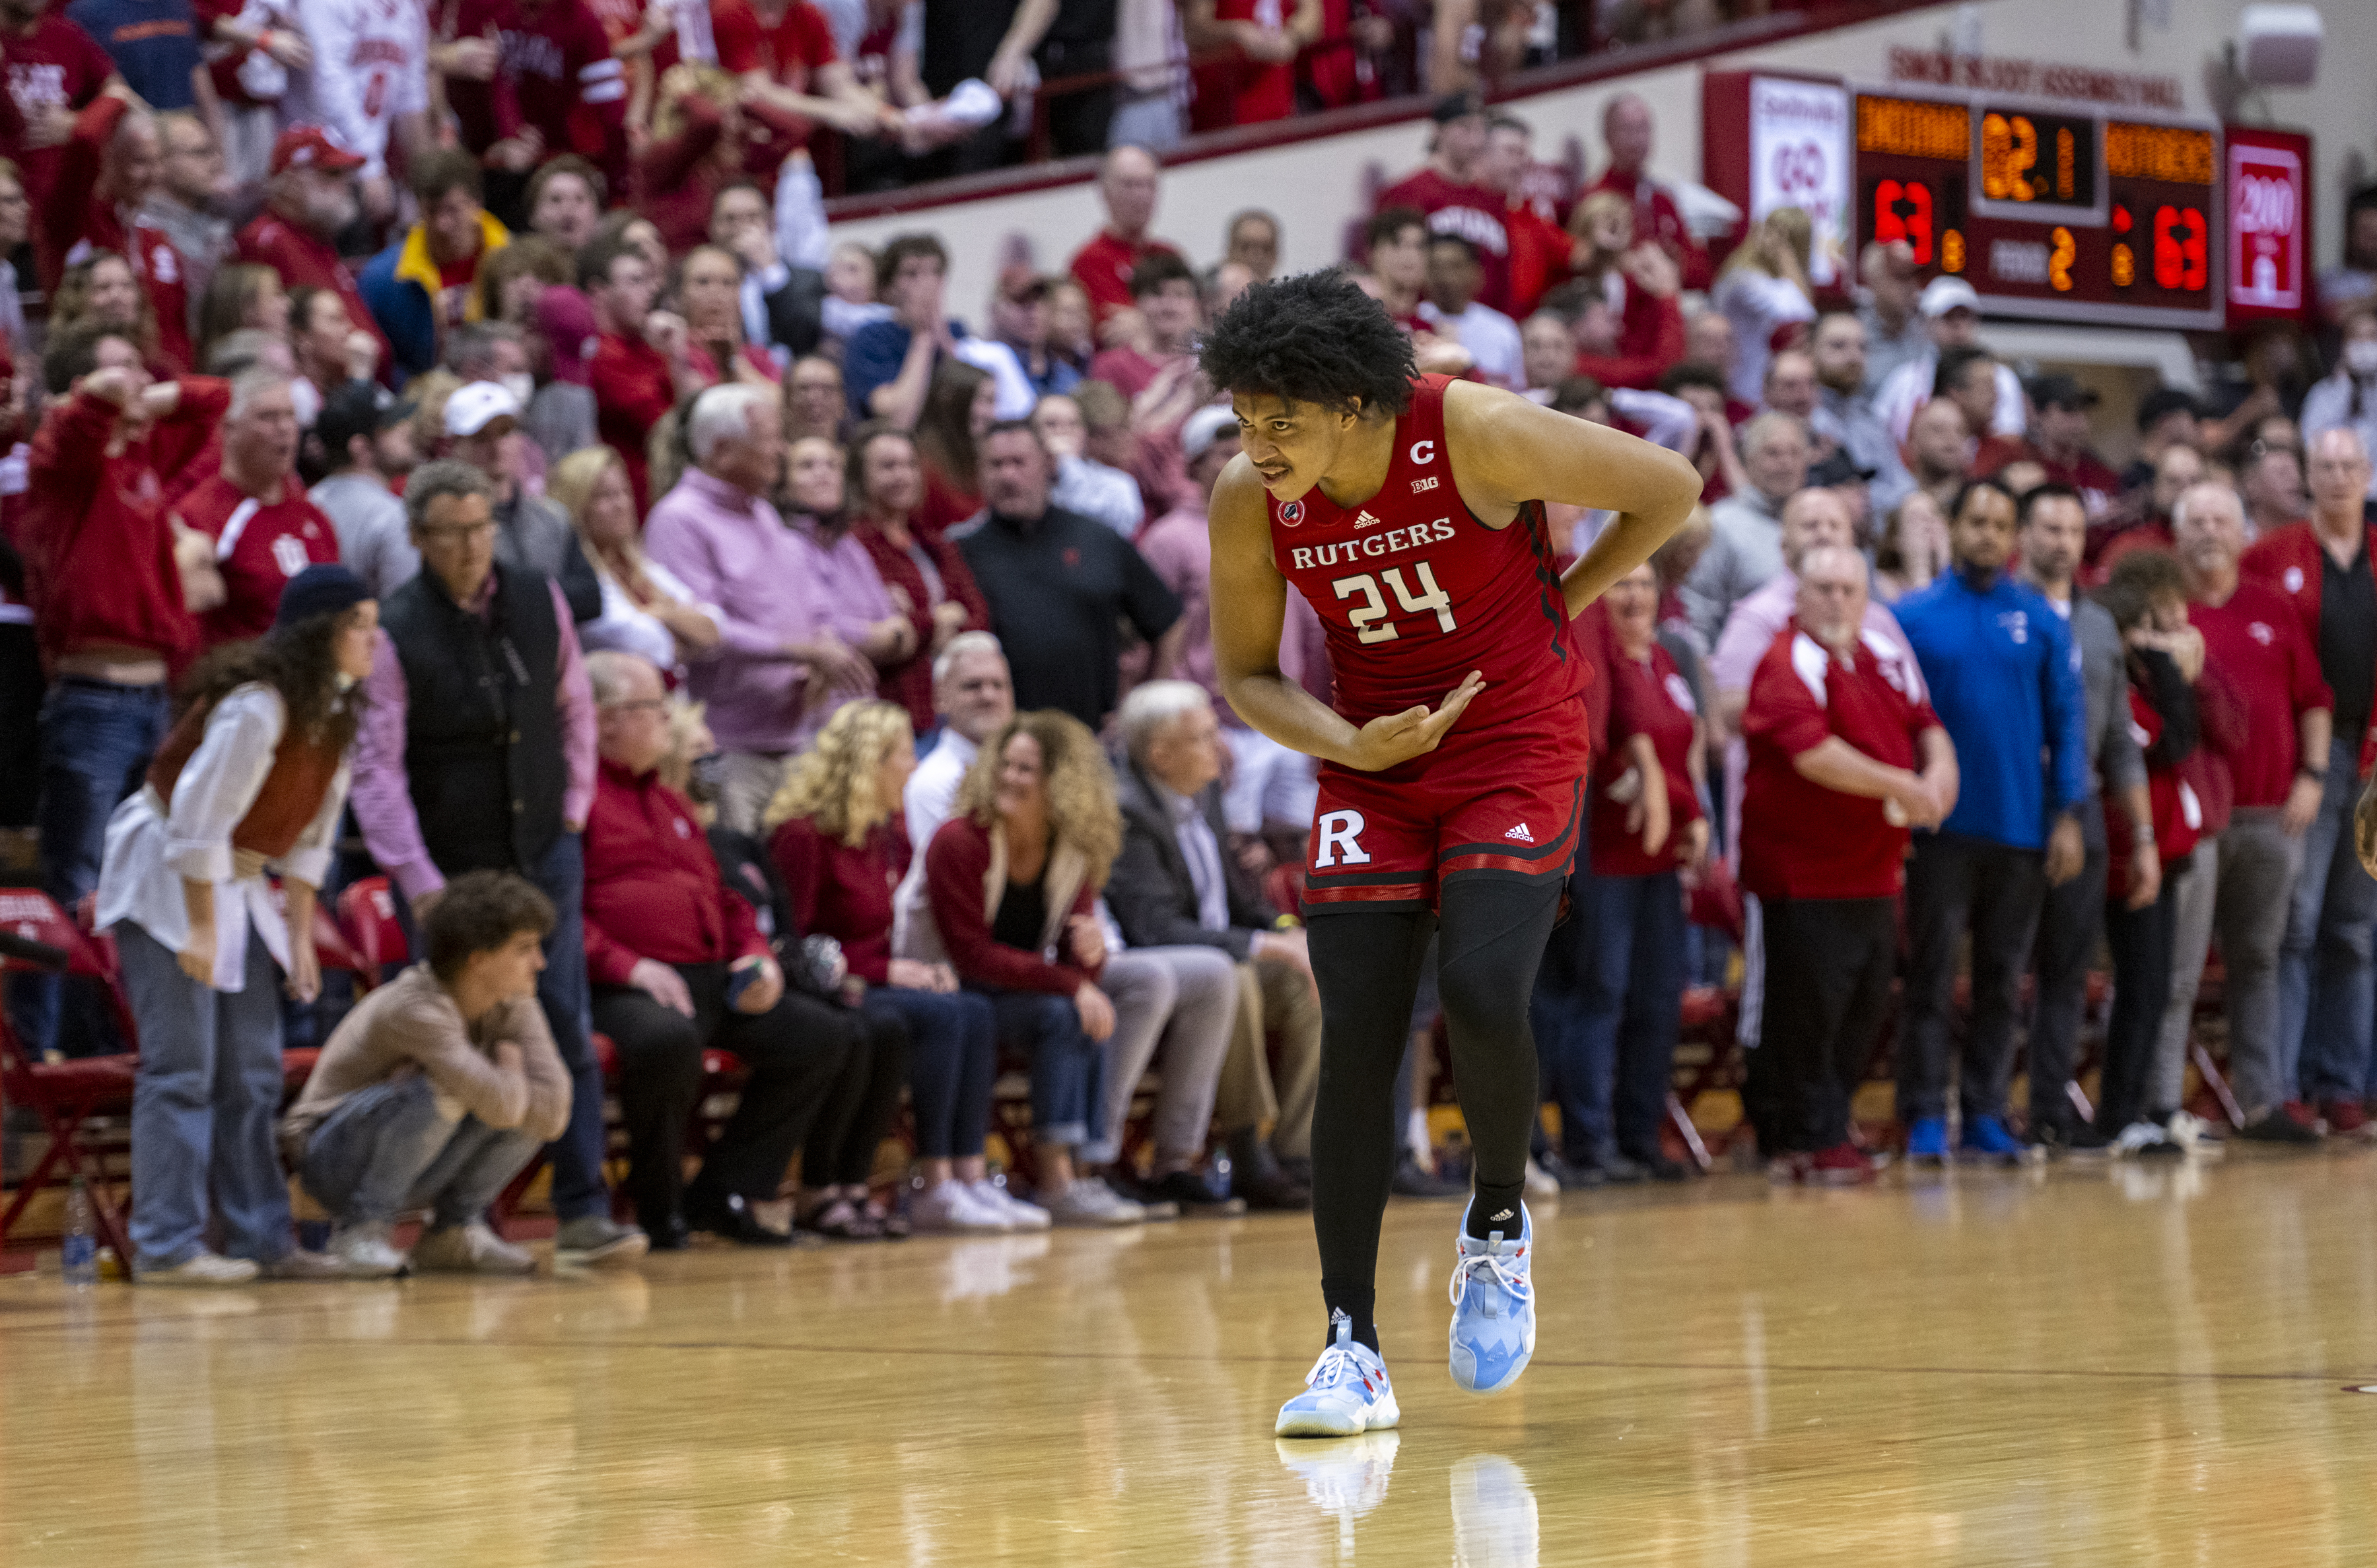 March Madness 2022: Ron Harper Jr. has become Rutgers' leader